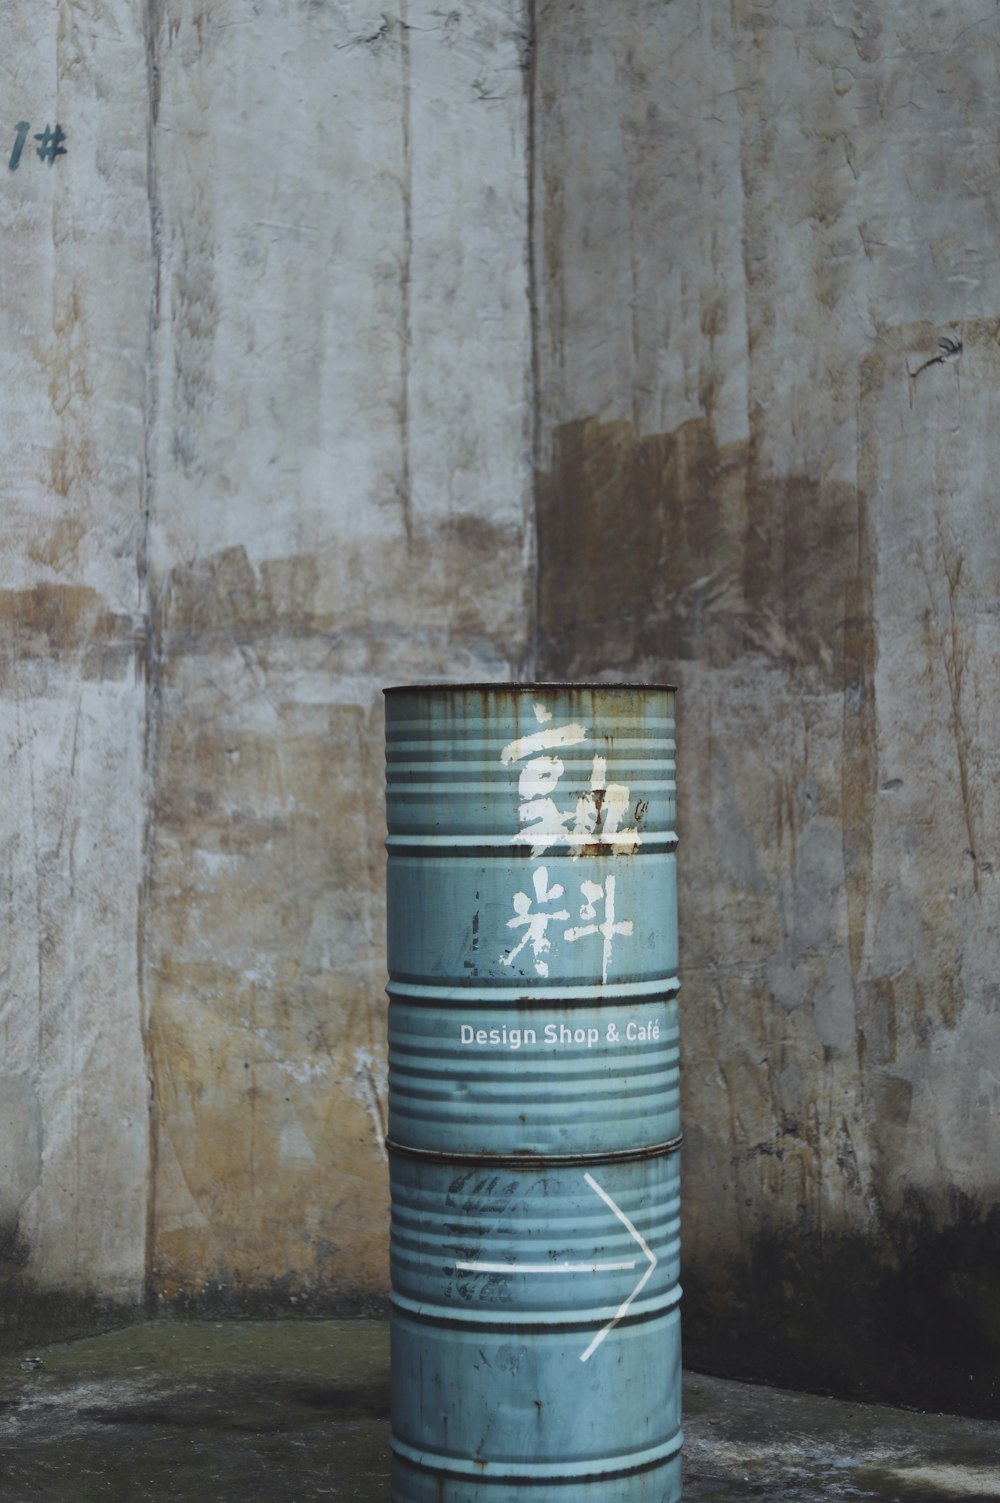 two blue barrel cans by the wall